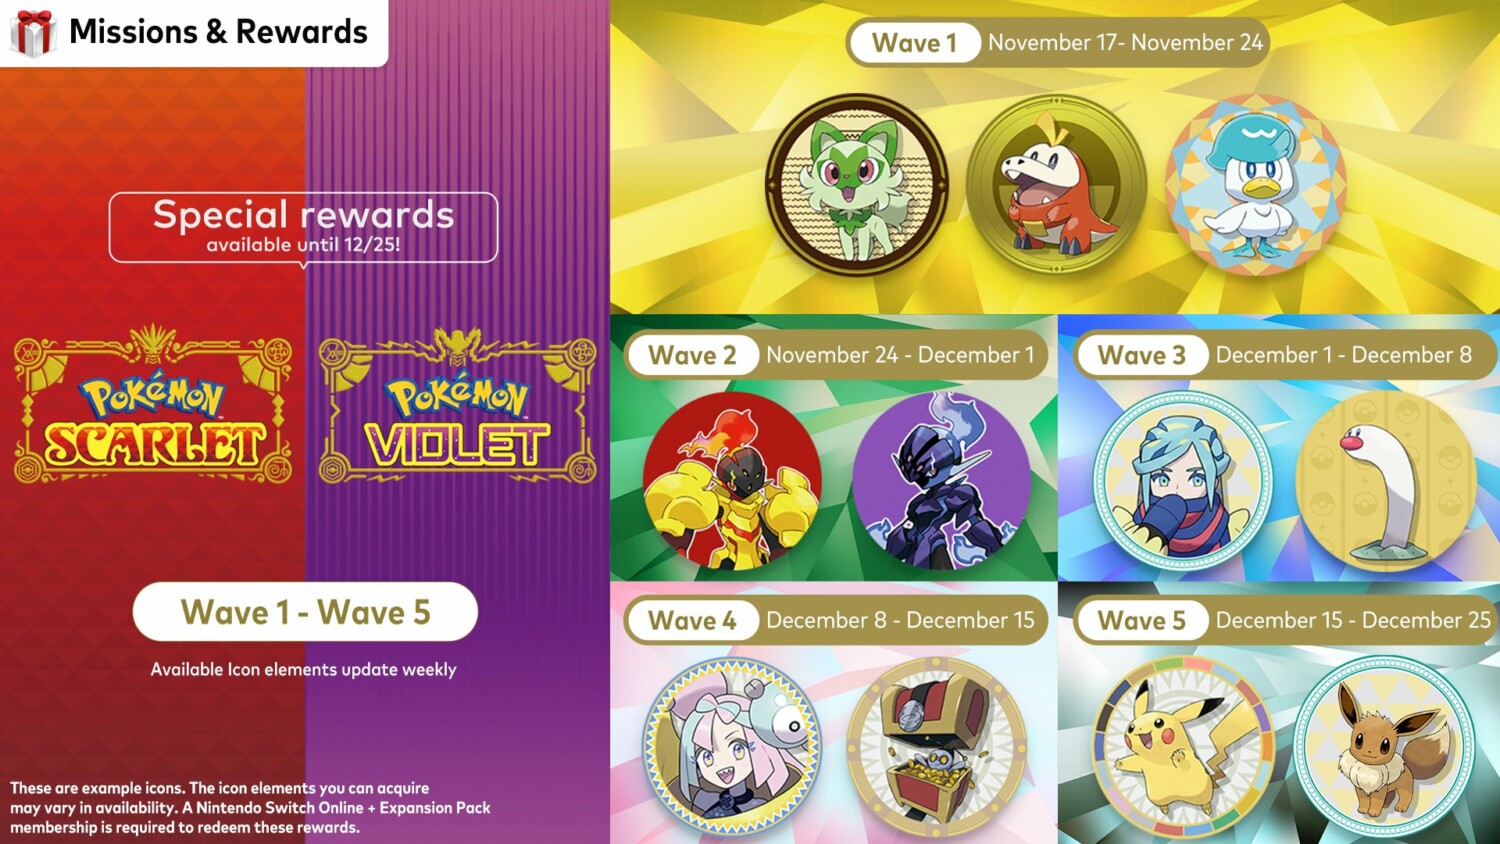 Next wave of Pokémon Scarlet/Violet-themed Switch icons now available